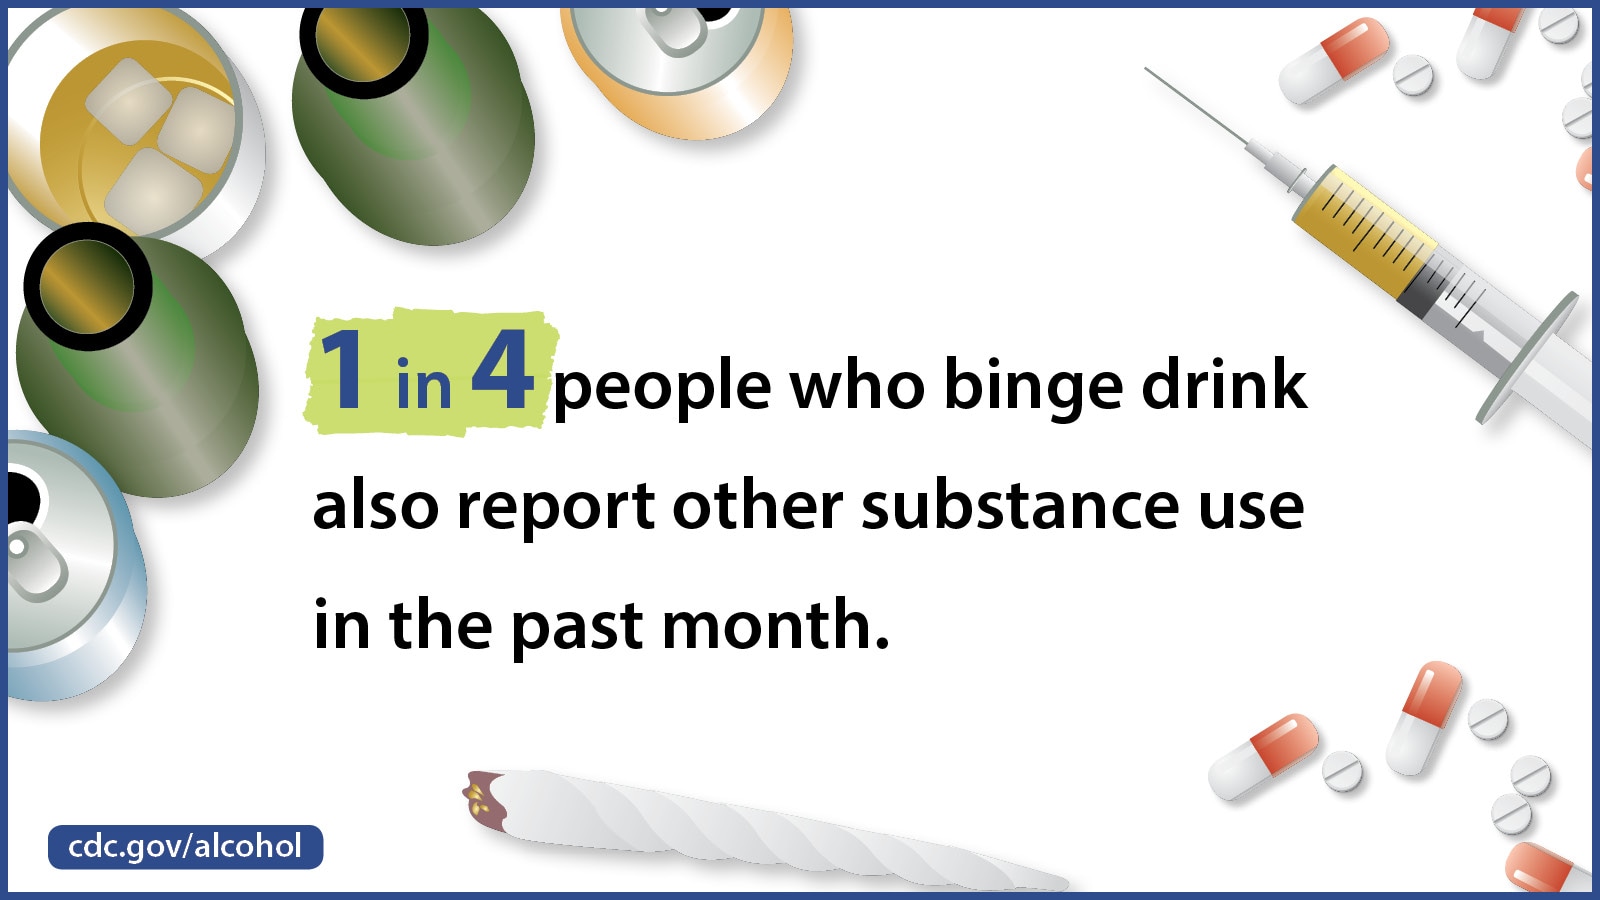 1 in 4 people who binge drink also report other substance use in the past month.